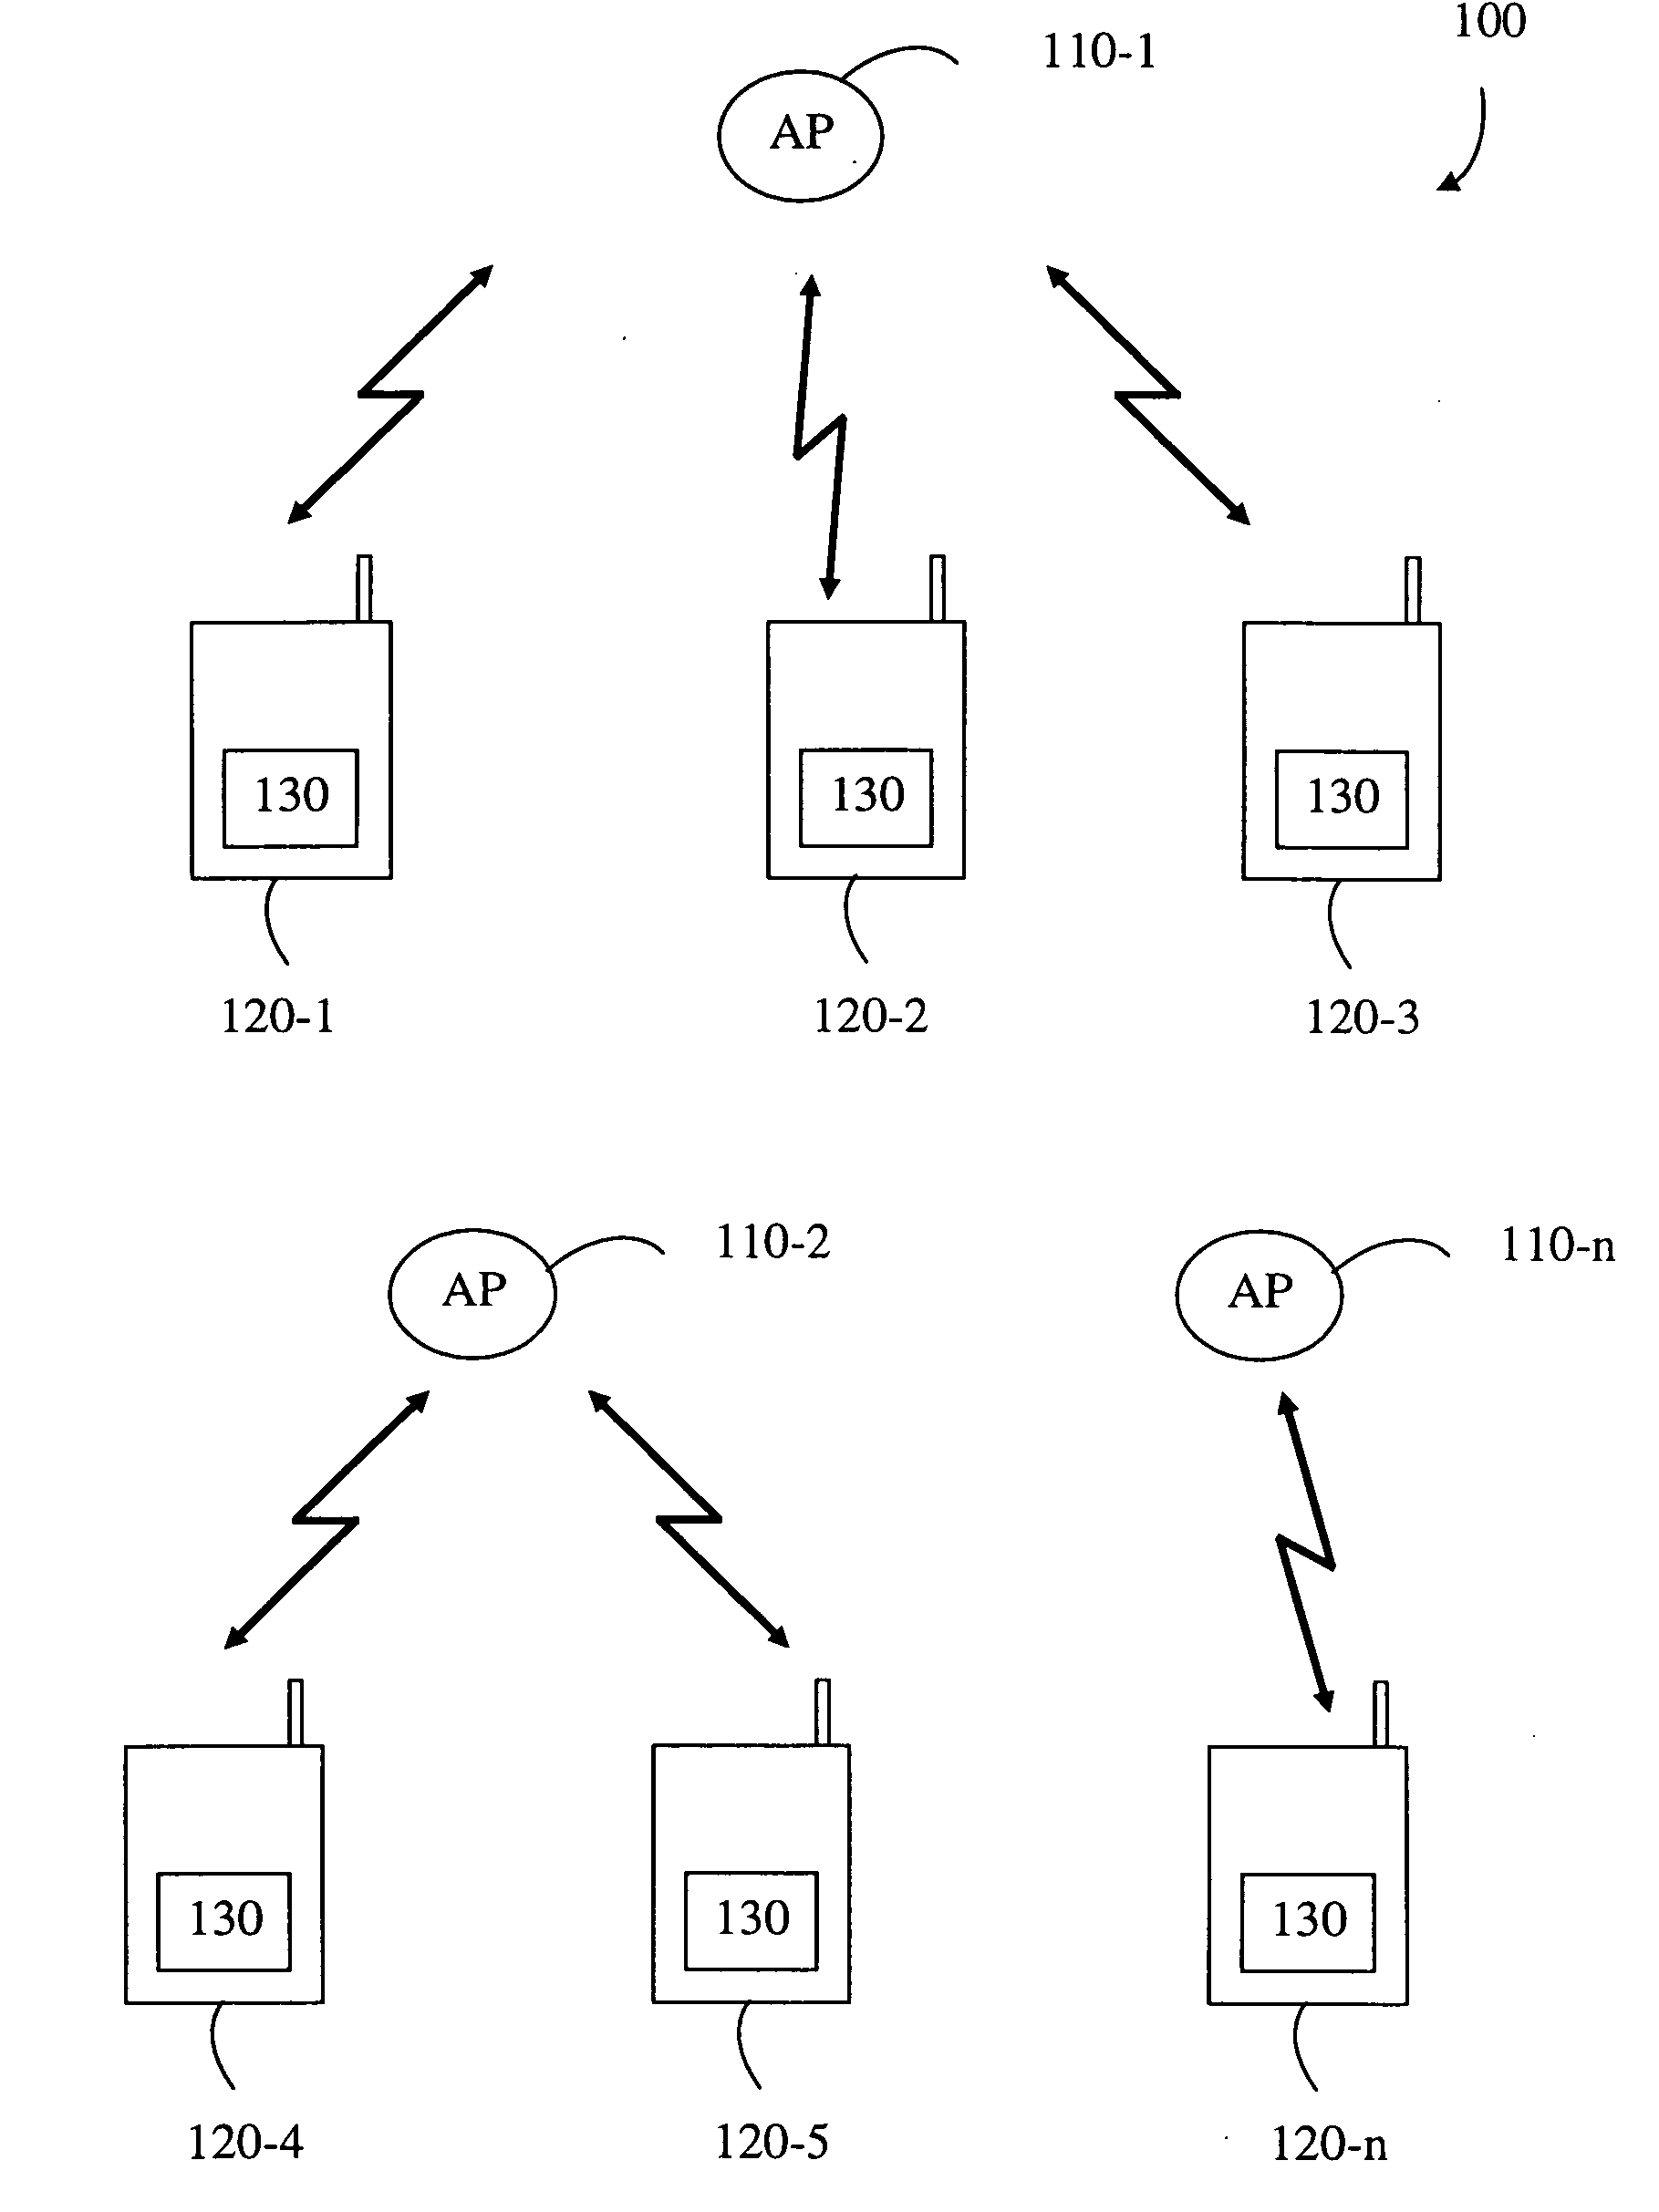 System and method of reducing interferences in wireless communication networks